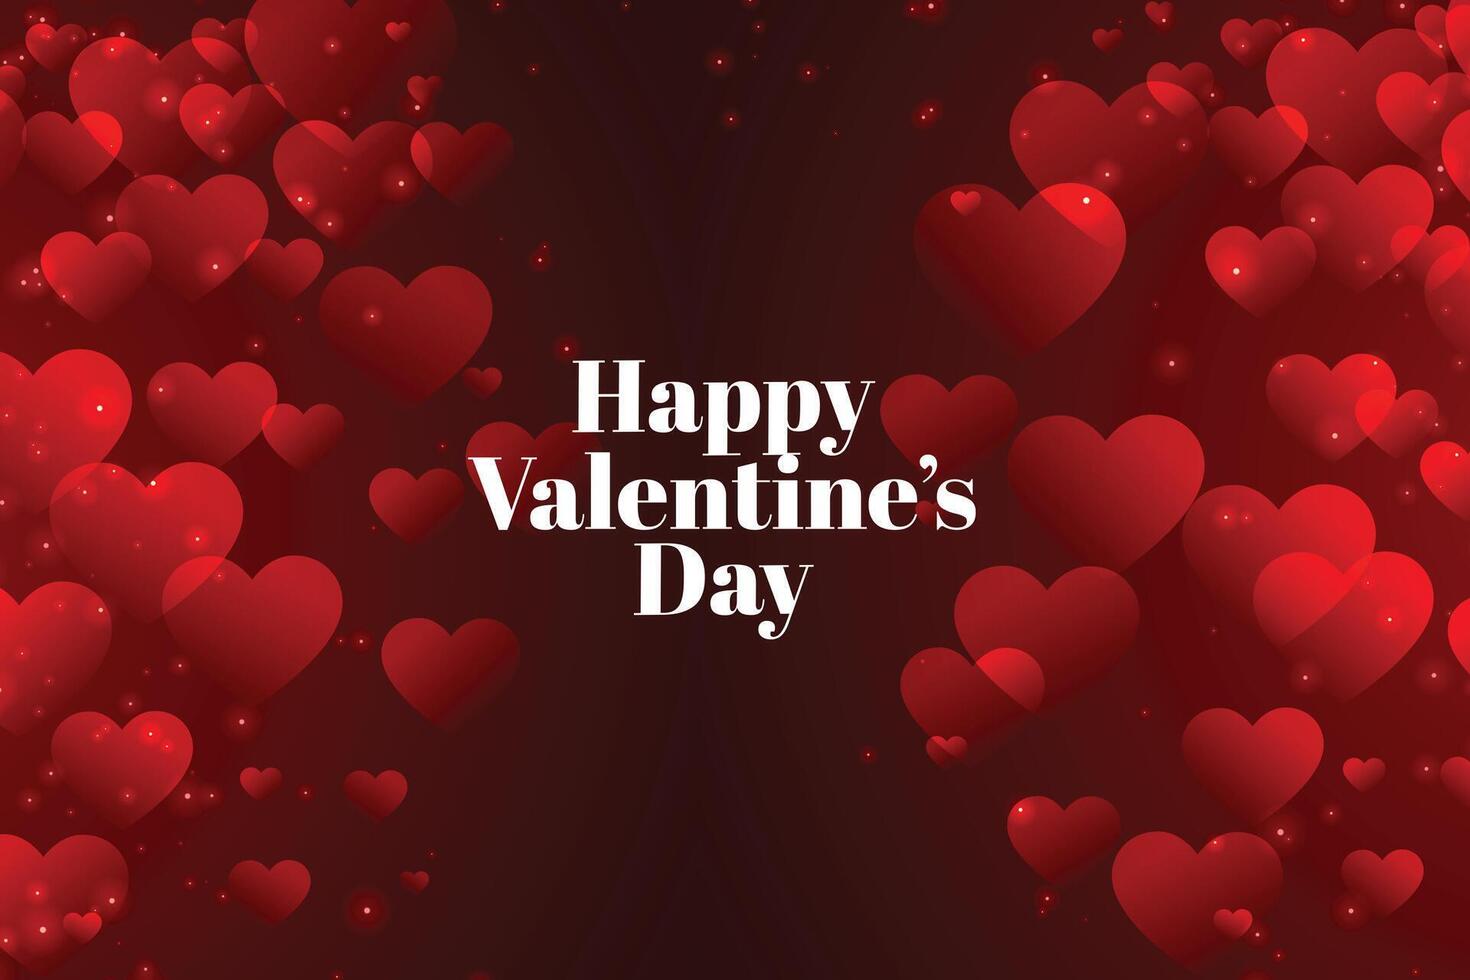 red valentines day background with many hearts vector